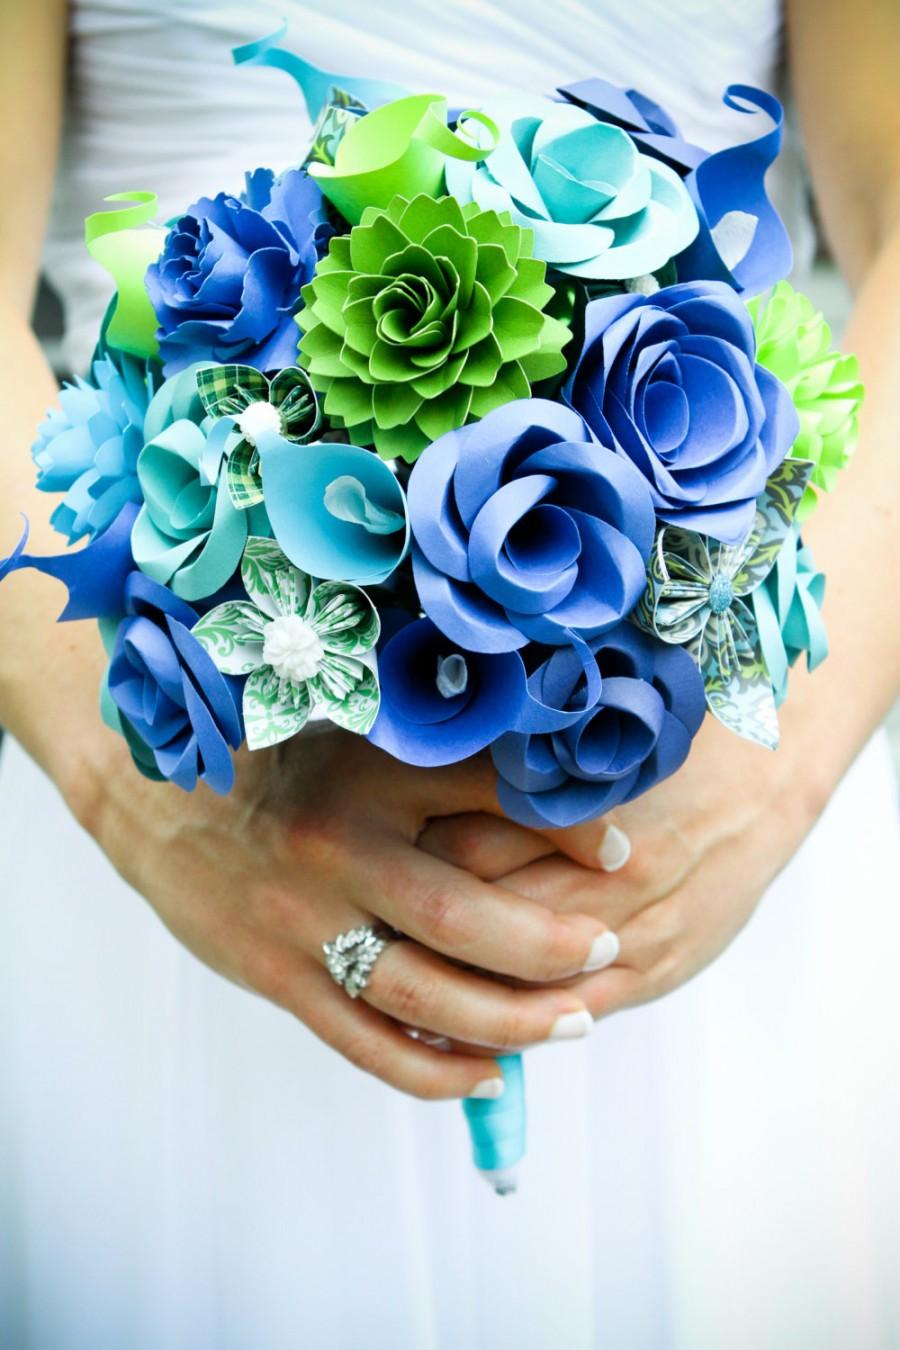 Wedding - Custom Paper Flower Wedding Bouquets. You Pick The Colors, Papers, Books, Etc.  Anything Is Possible. CUSTOM ORDERS WELCOME